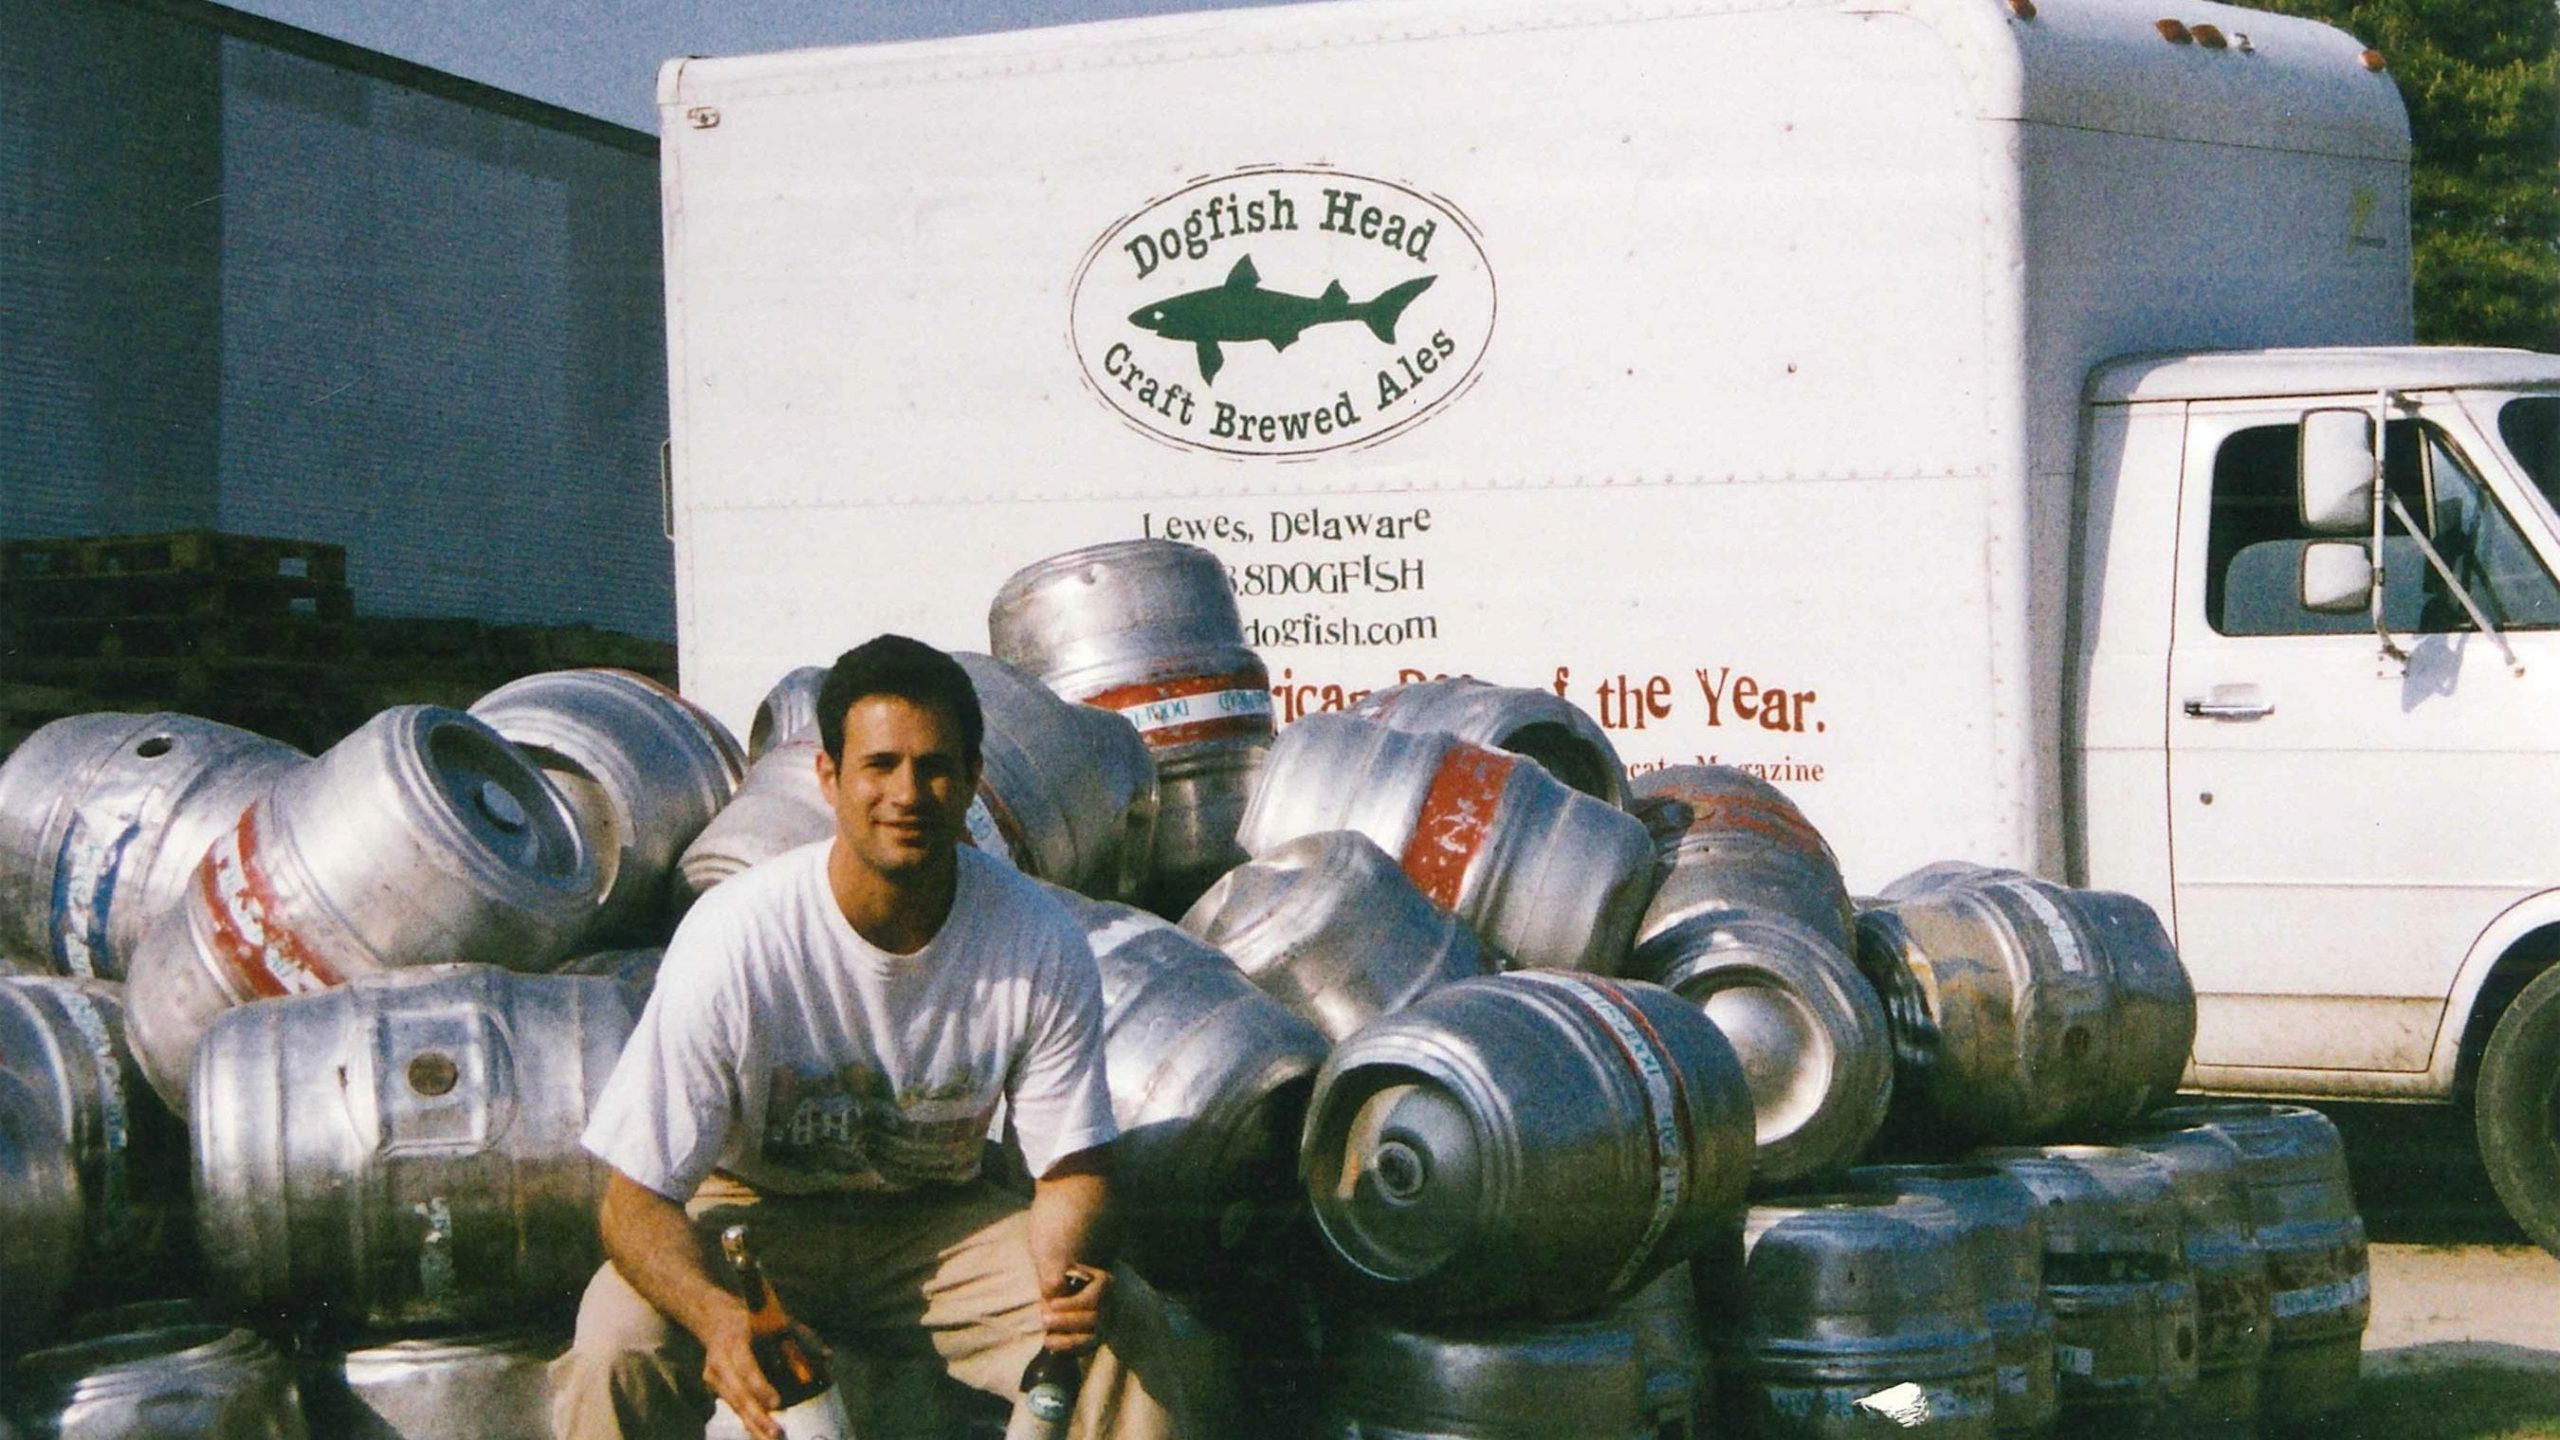 Sneak Peek: In 1994, News Journal Reports On Plans For New Brewery Called Dogfish Head photo